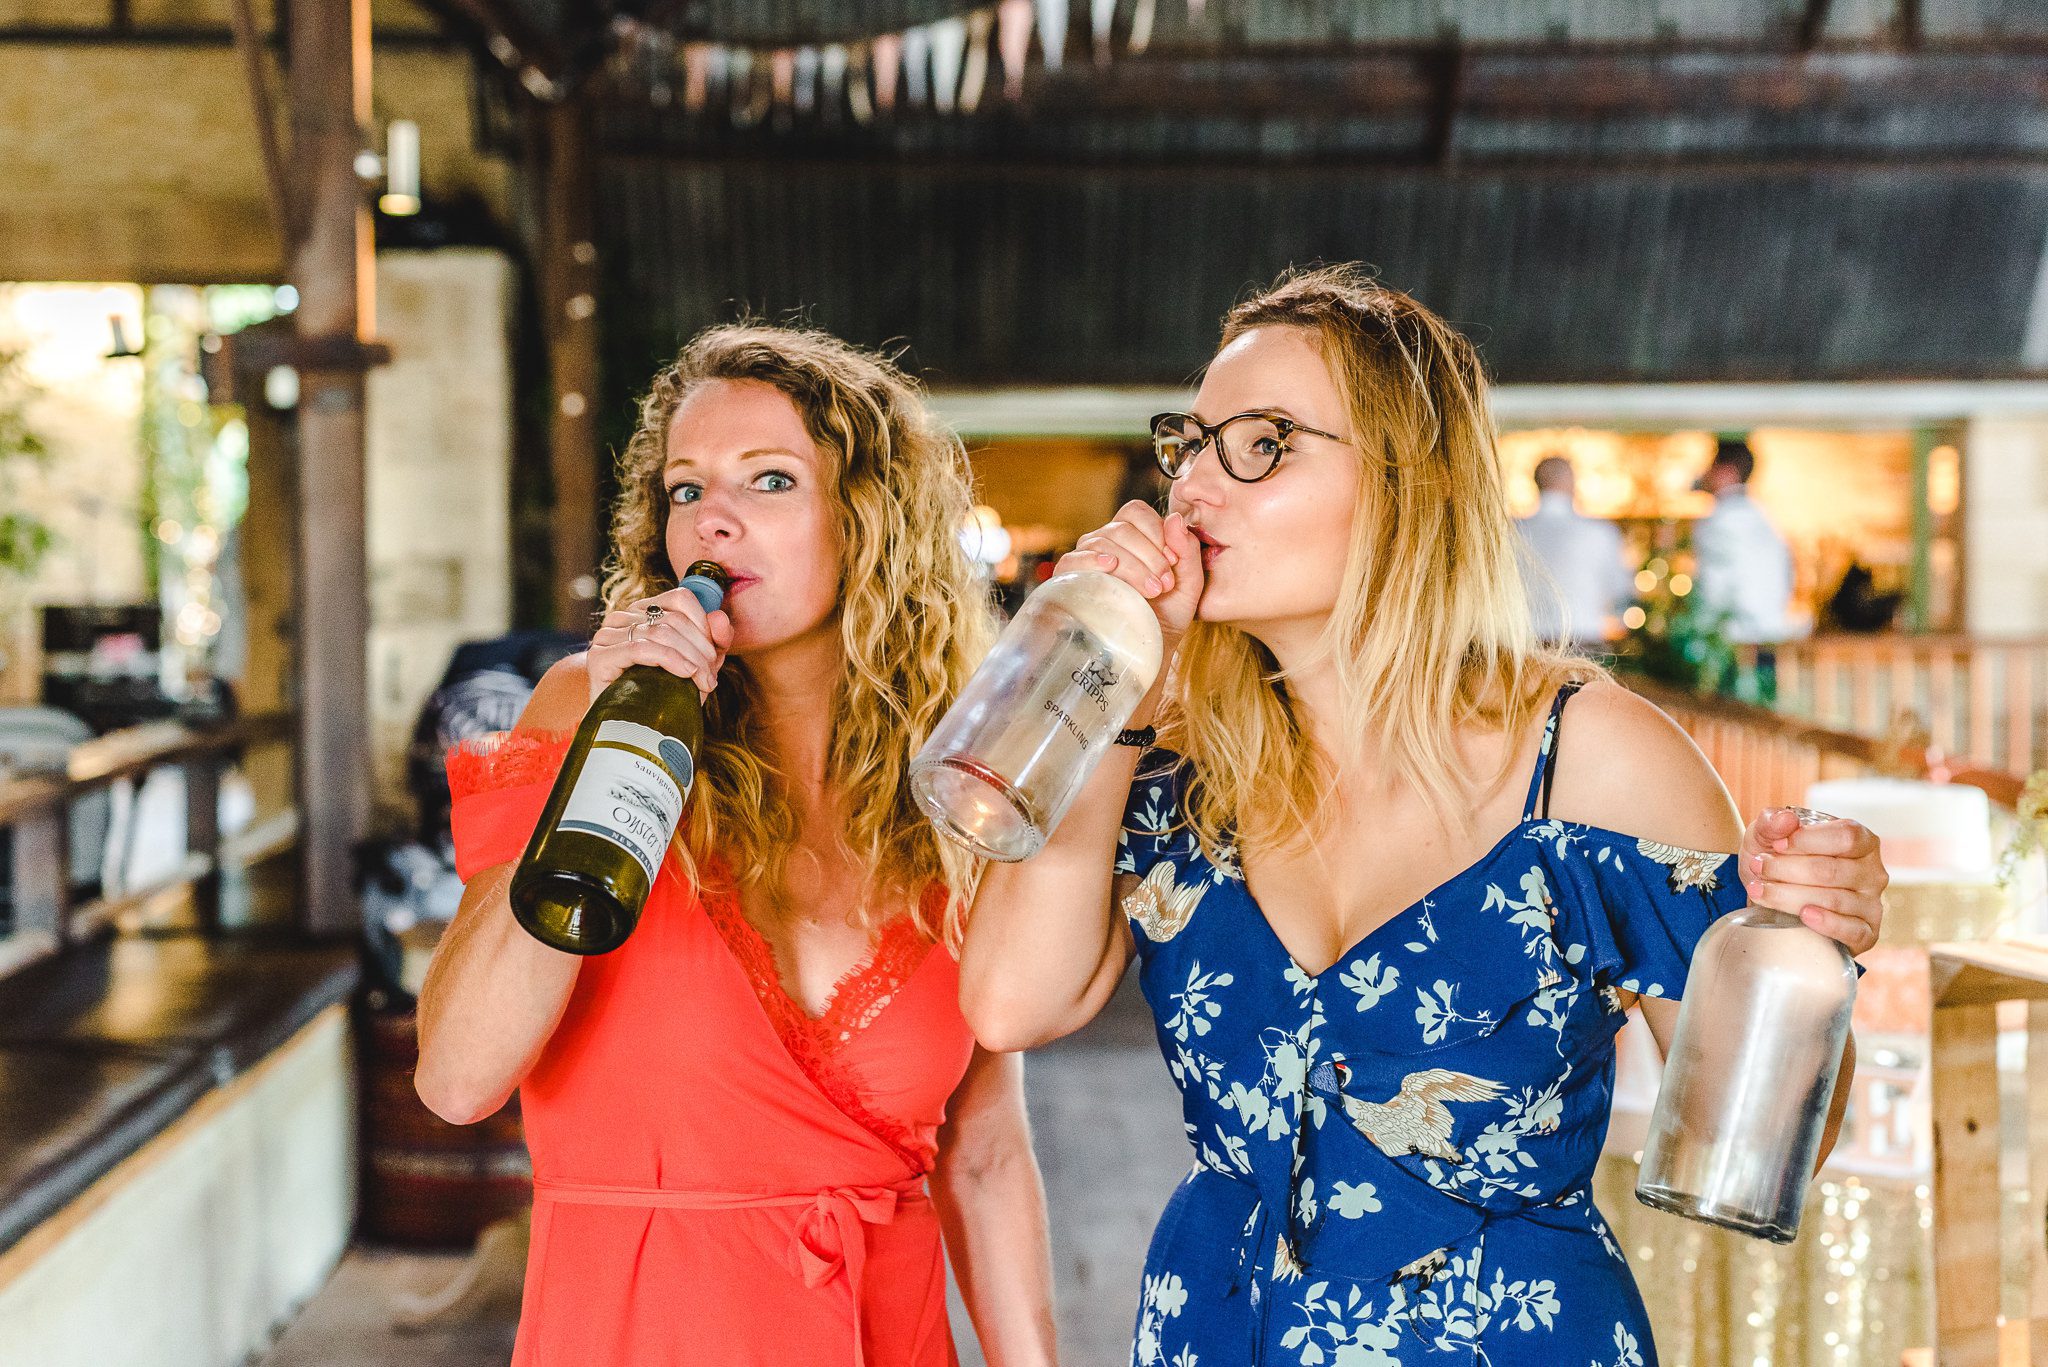 Wedding guests pretending to drink from wine bottles